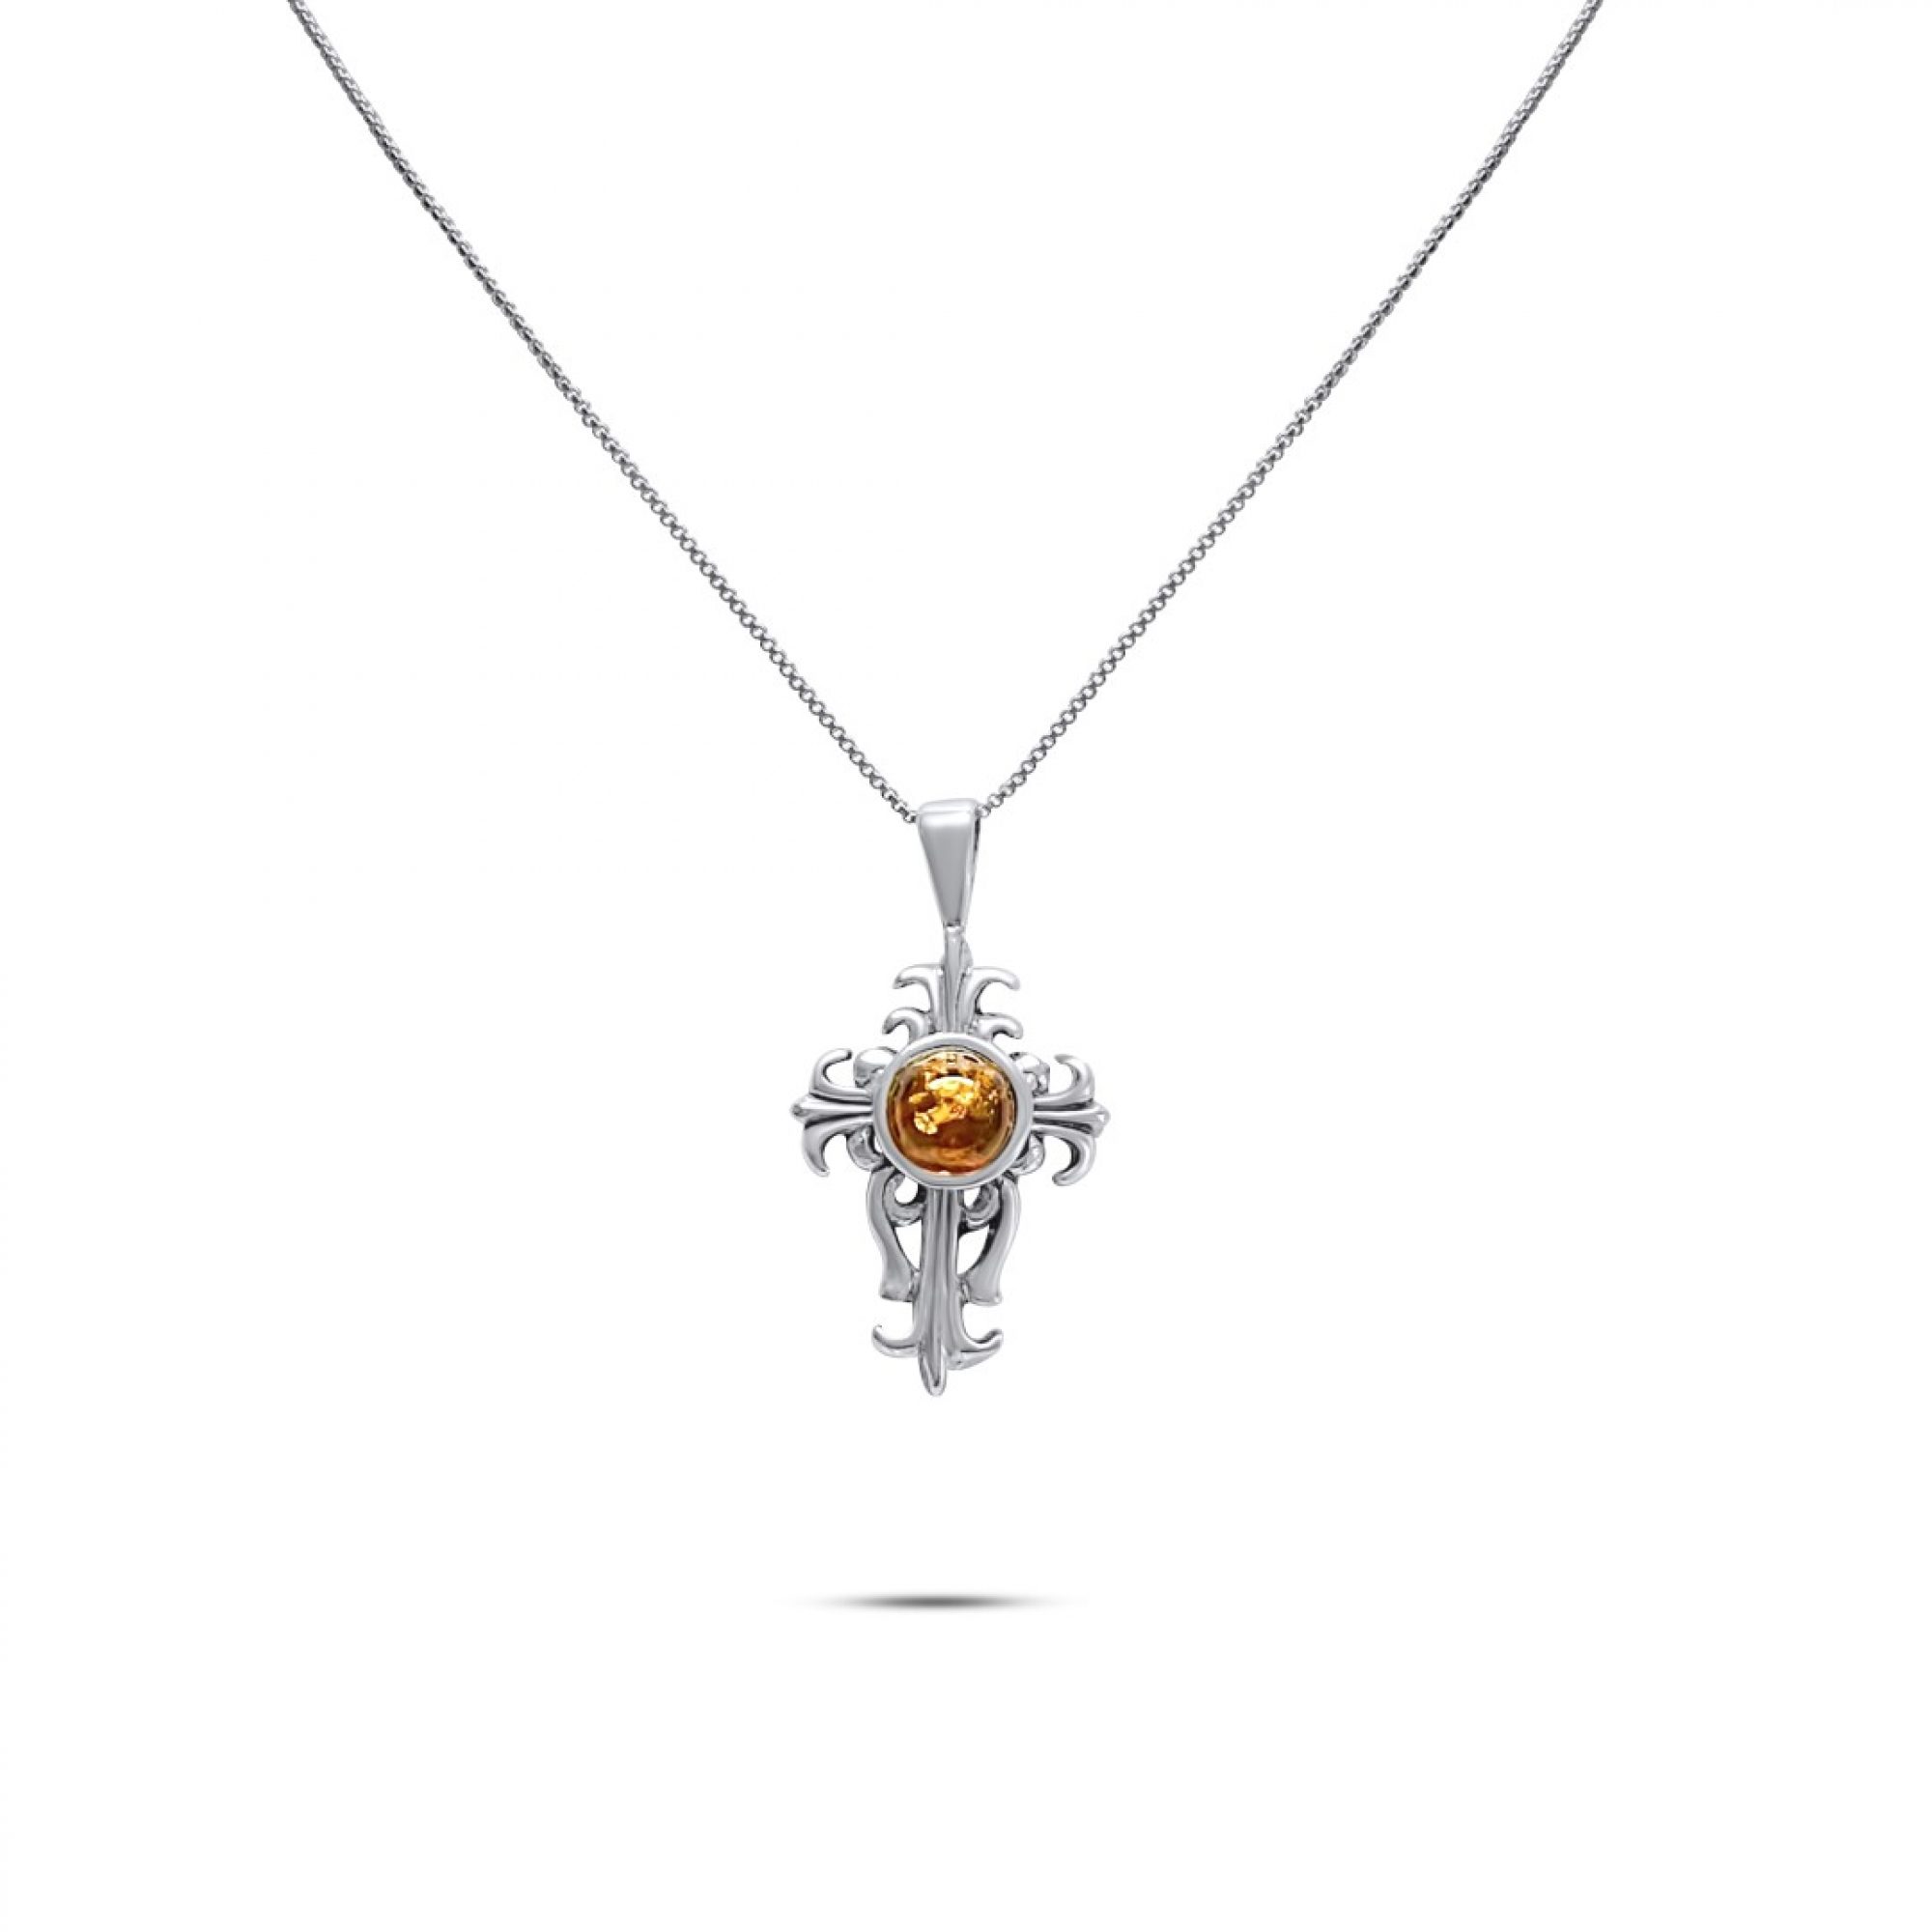 Amber silver cross necklace